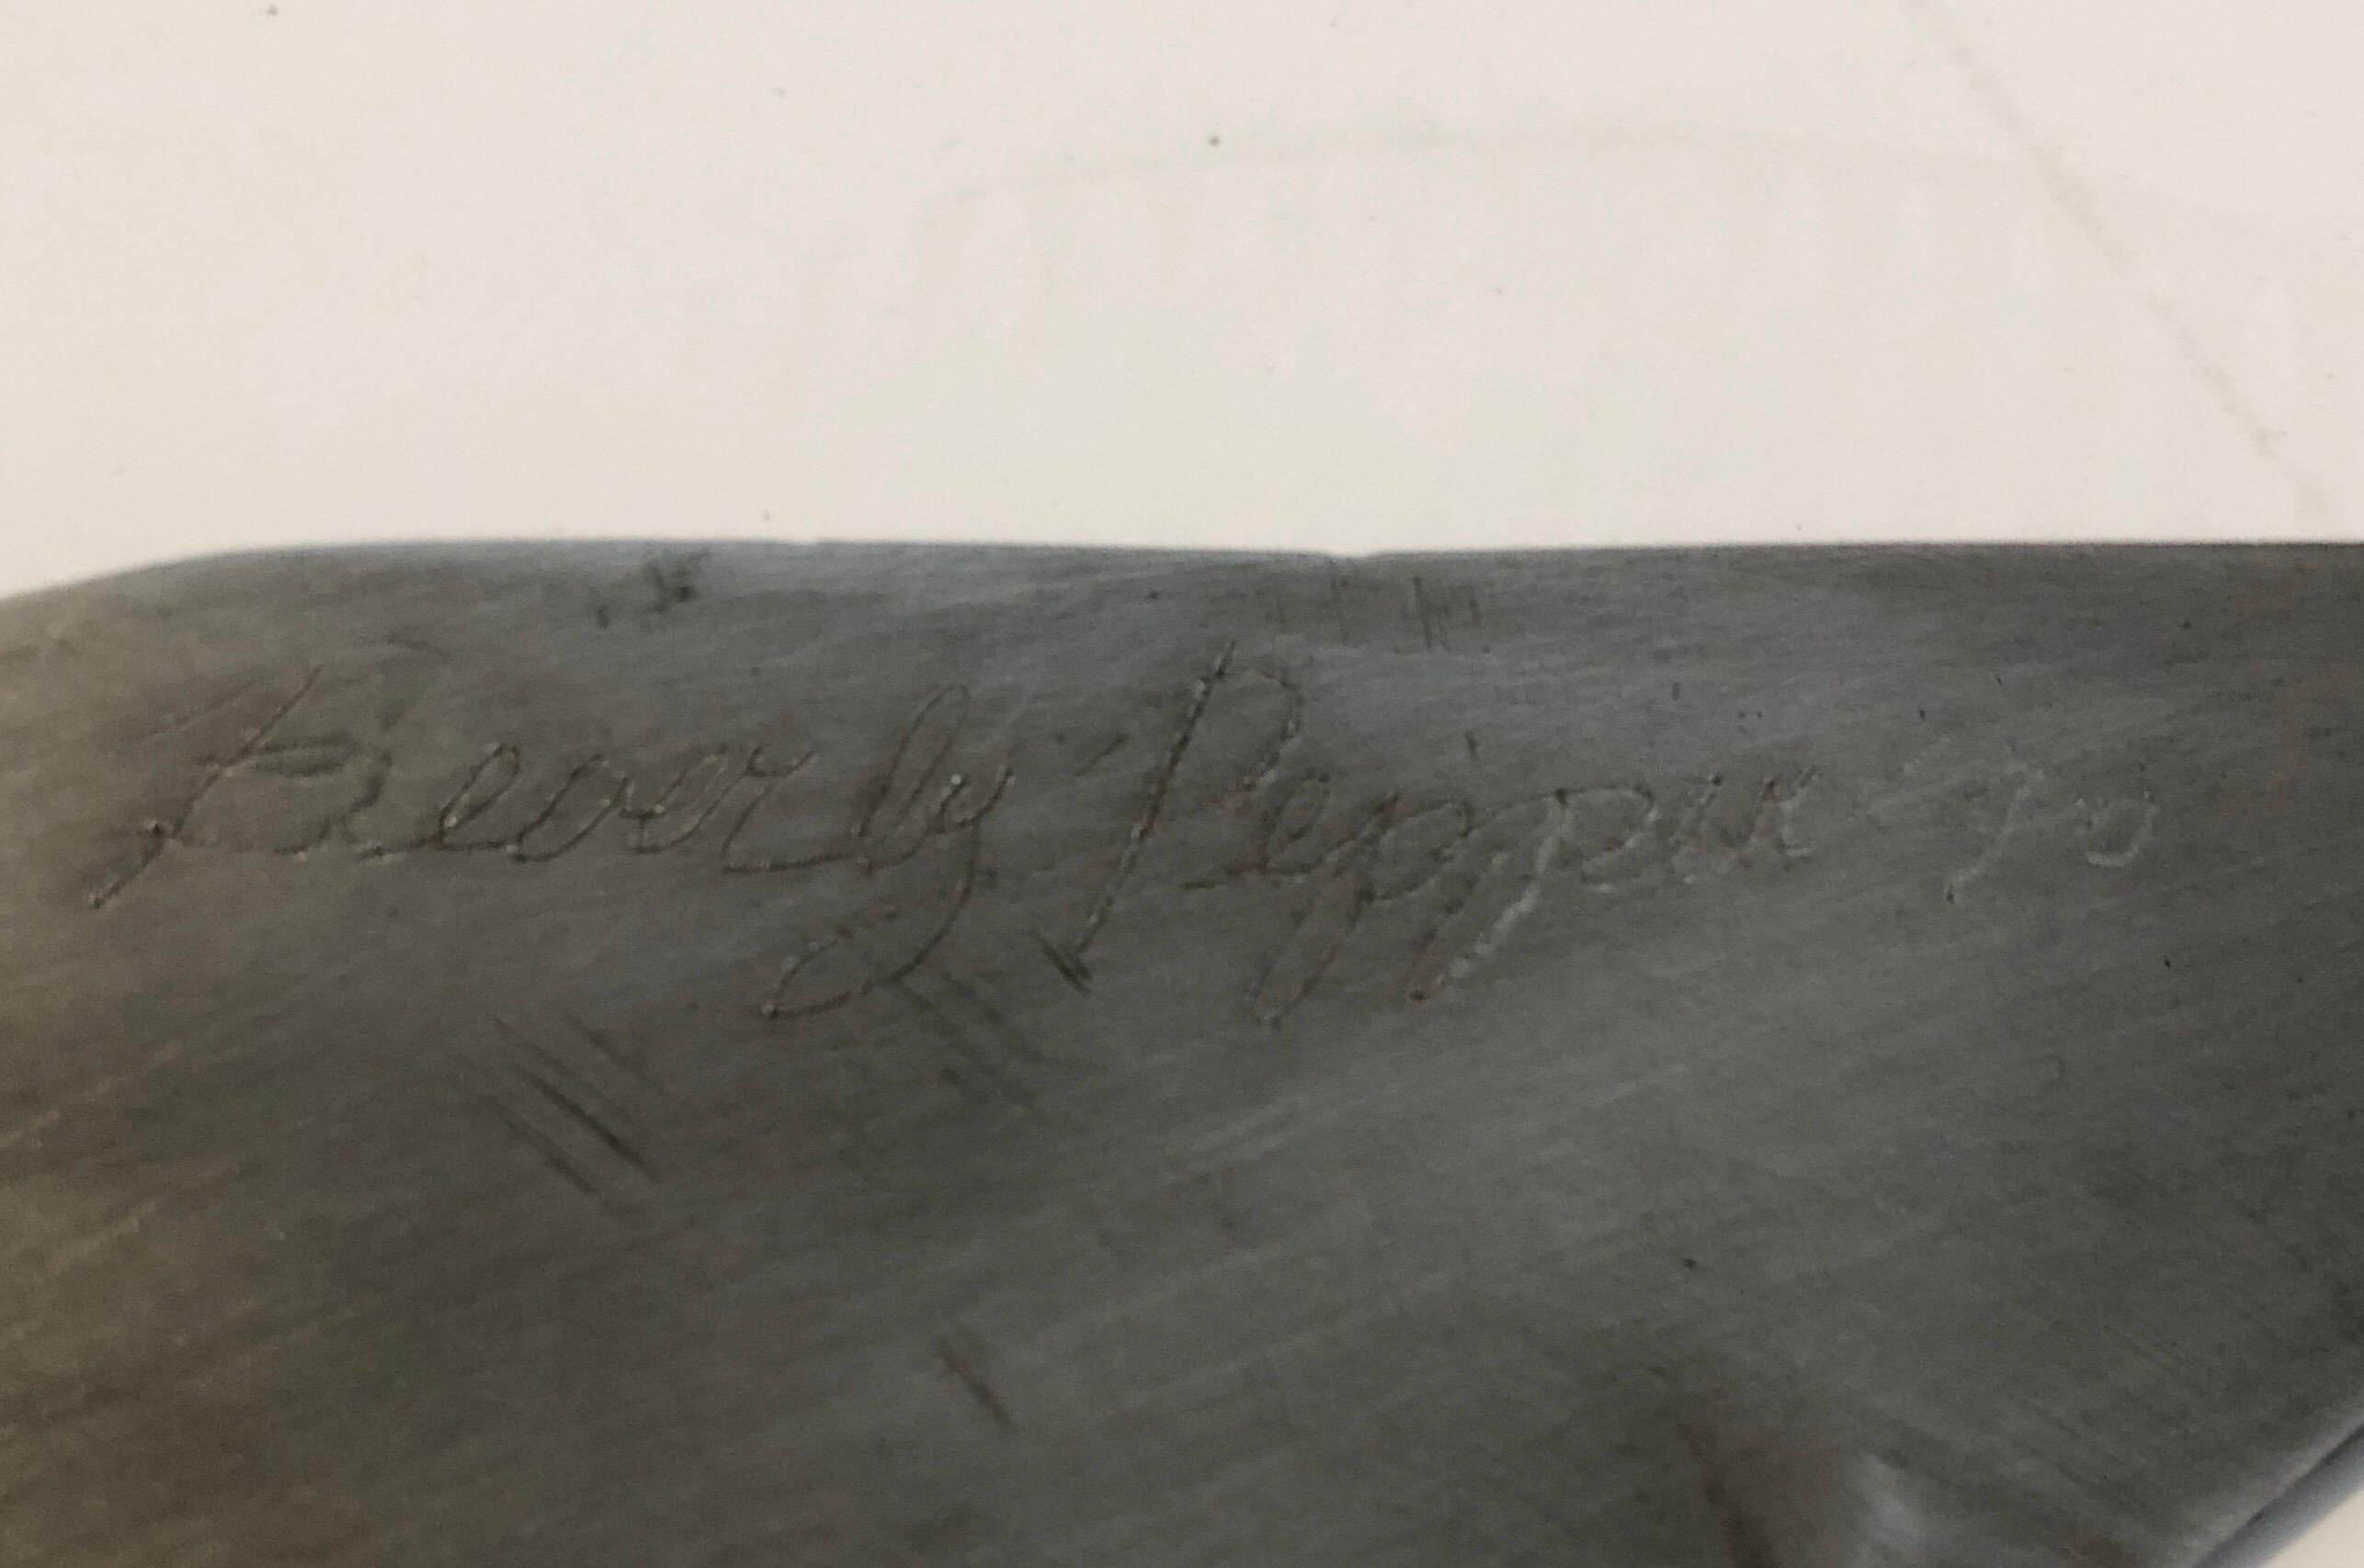 Beverly Stoll Pepper (American, b. 1924 ) 
Incised signature, date, and inscription 